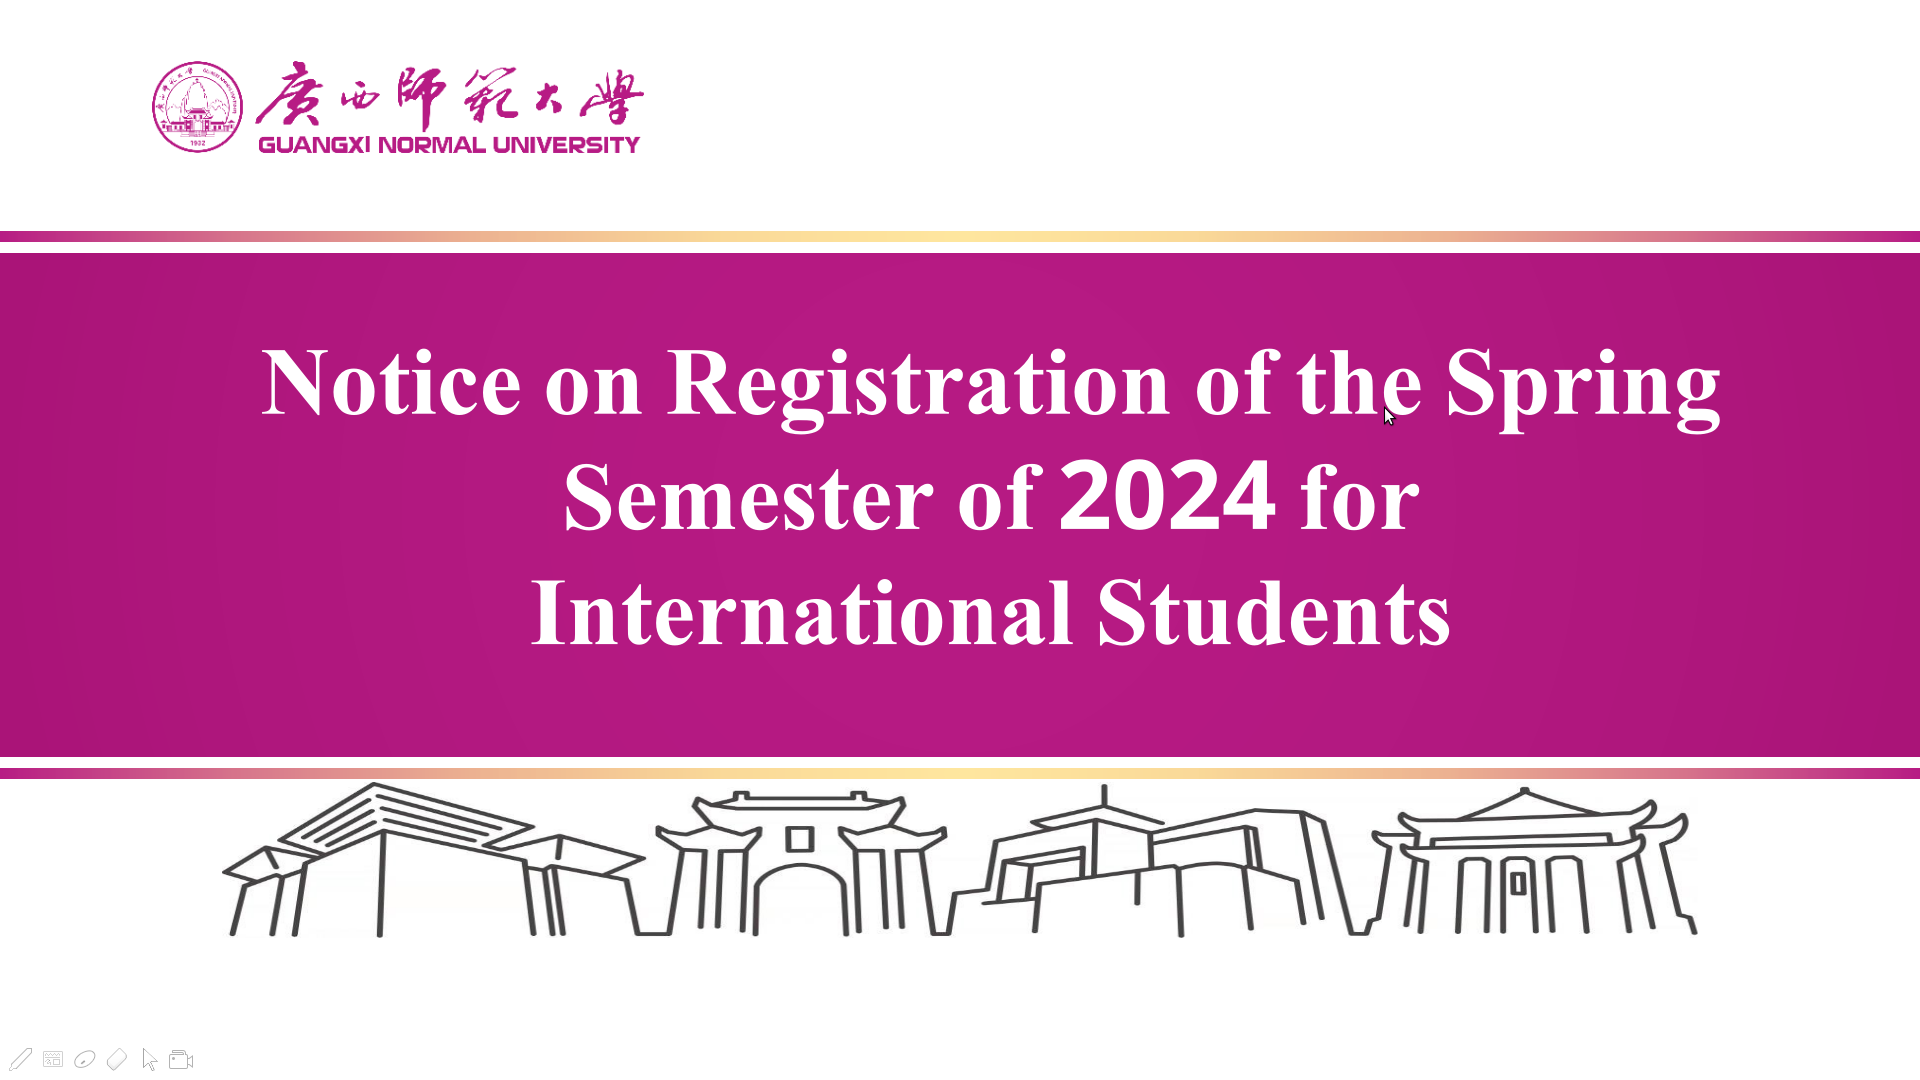 Notice on Registration of the Spring Semester of 2024 for GXNU International Students